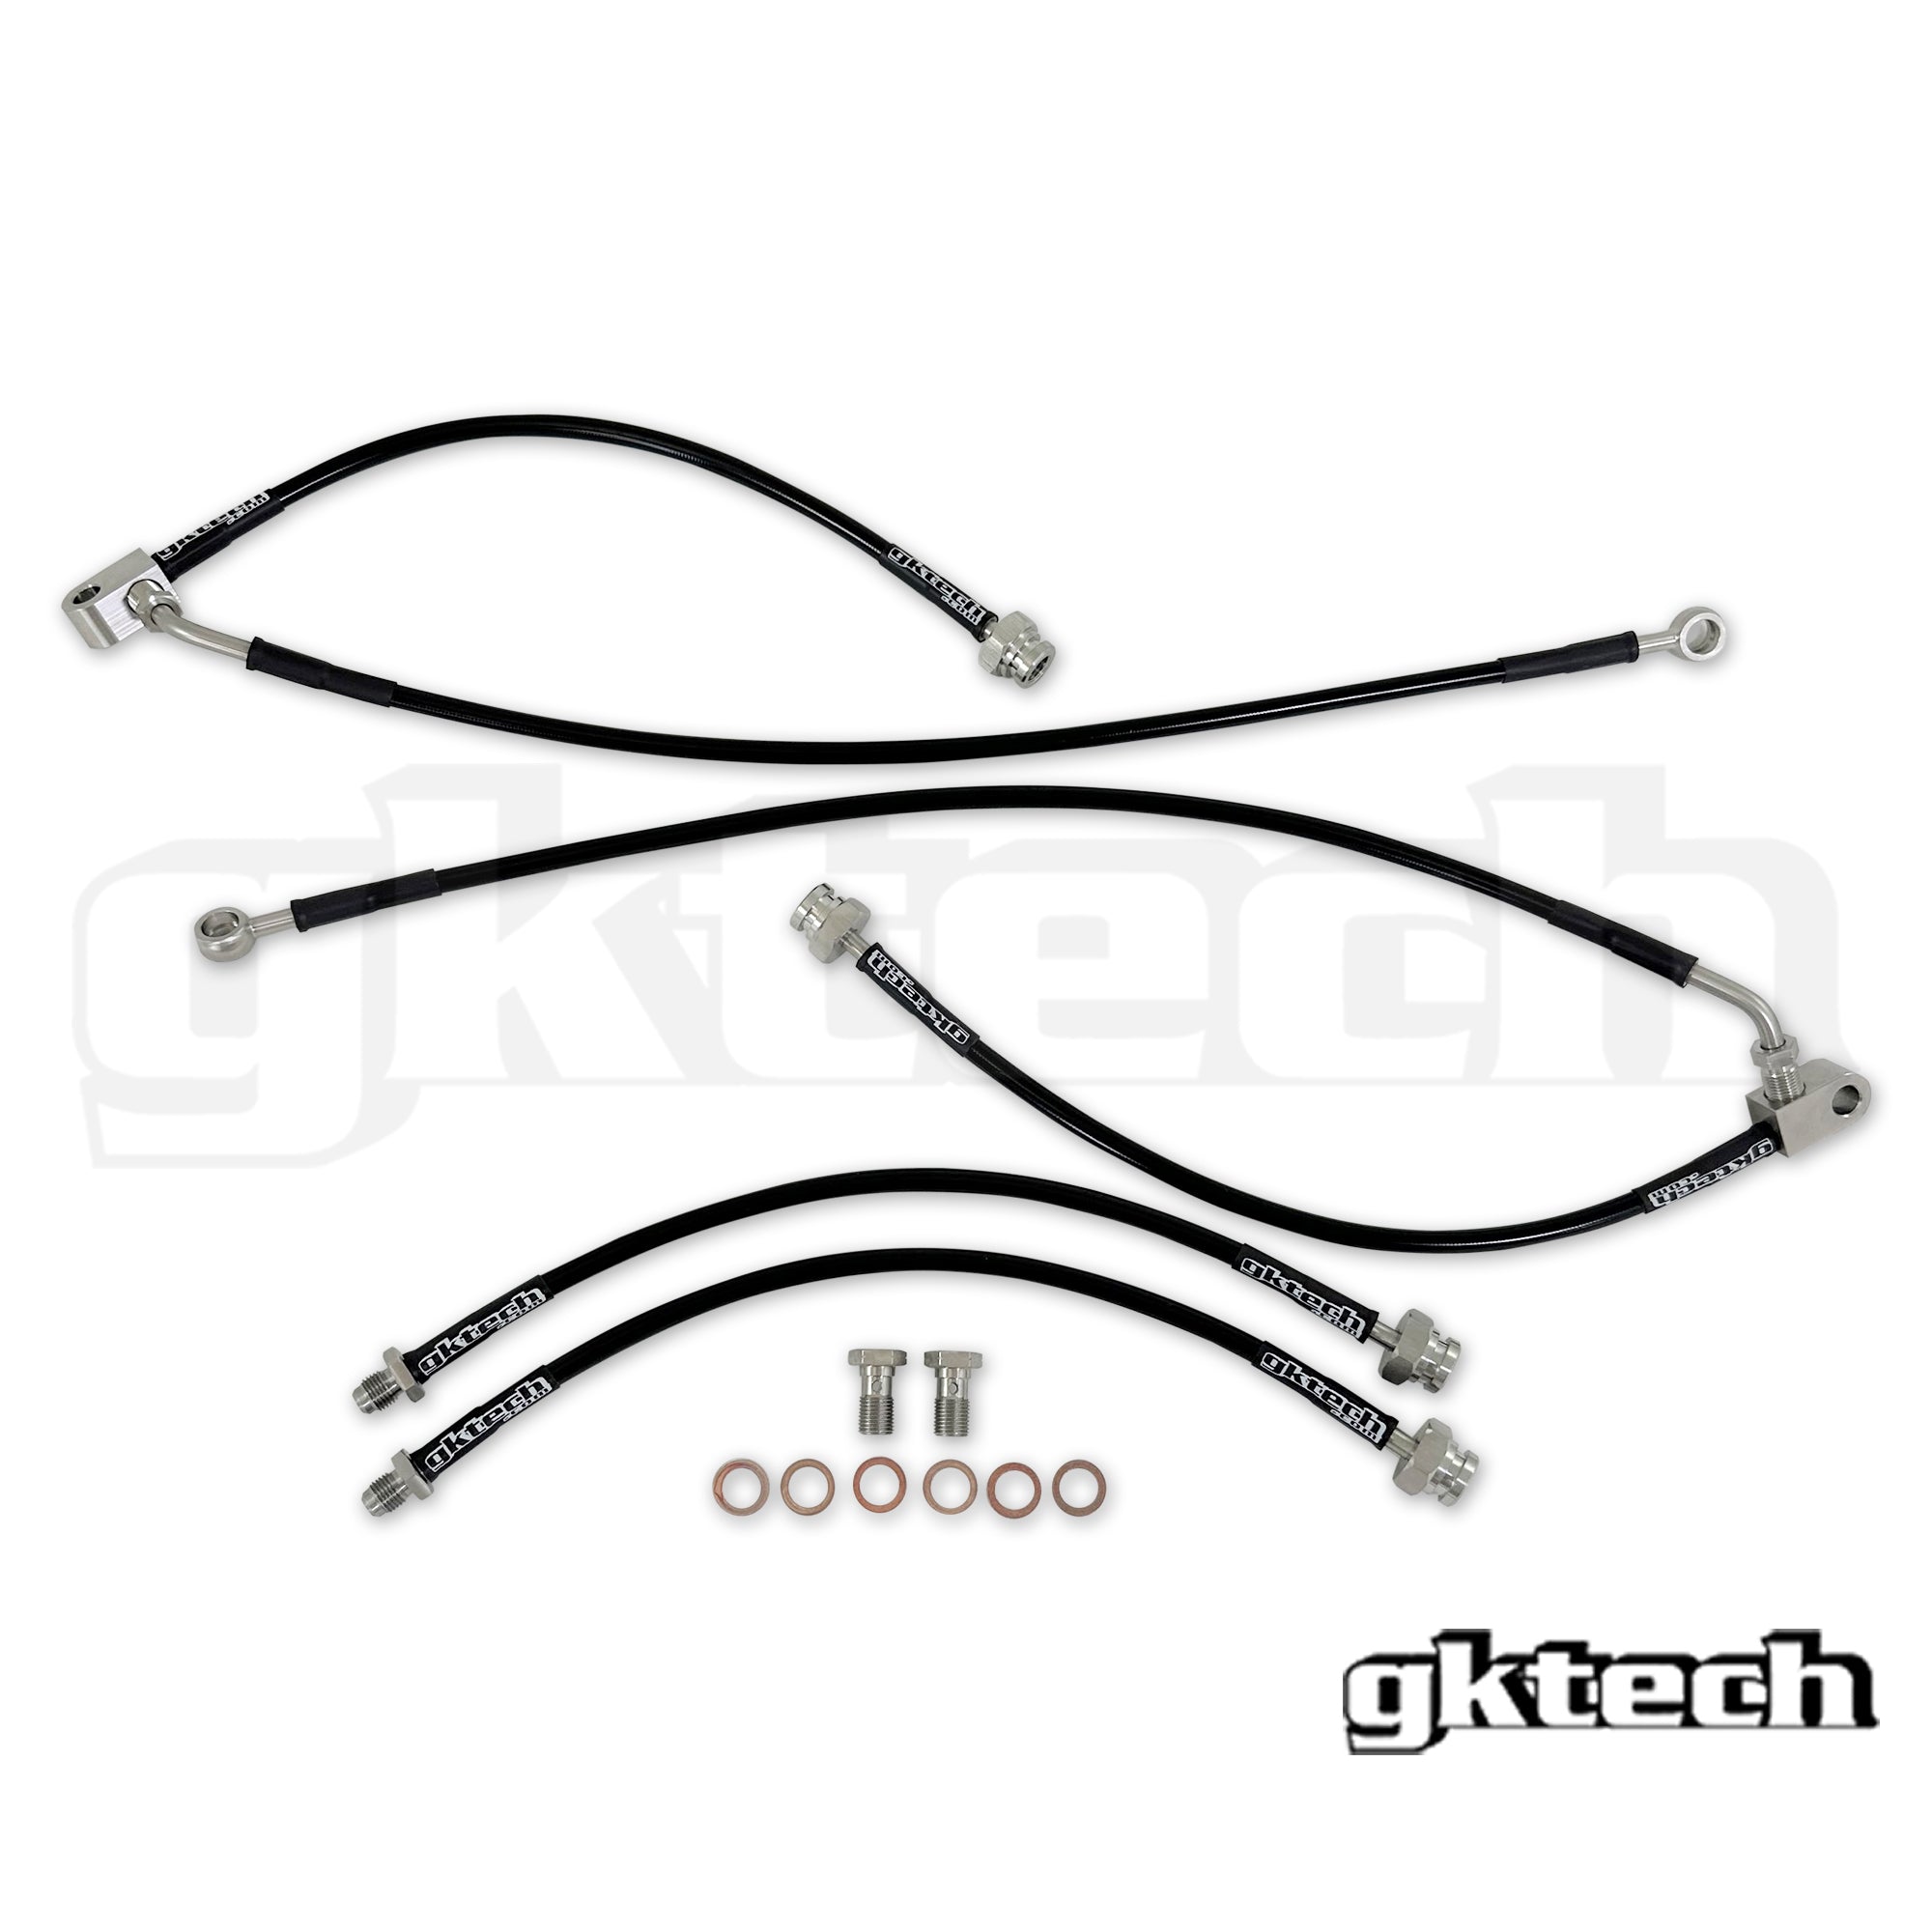 Z33 350z braided brake line set (front and rear)